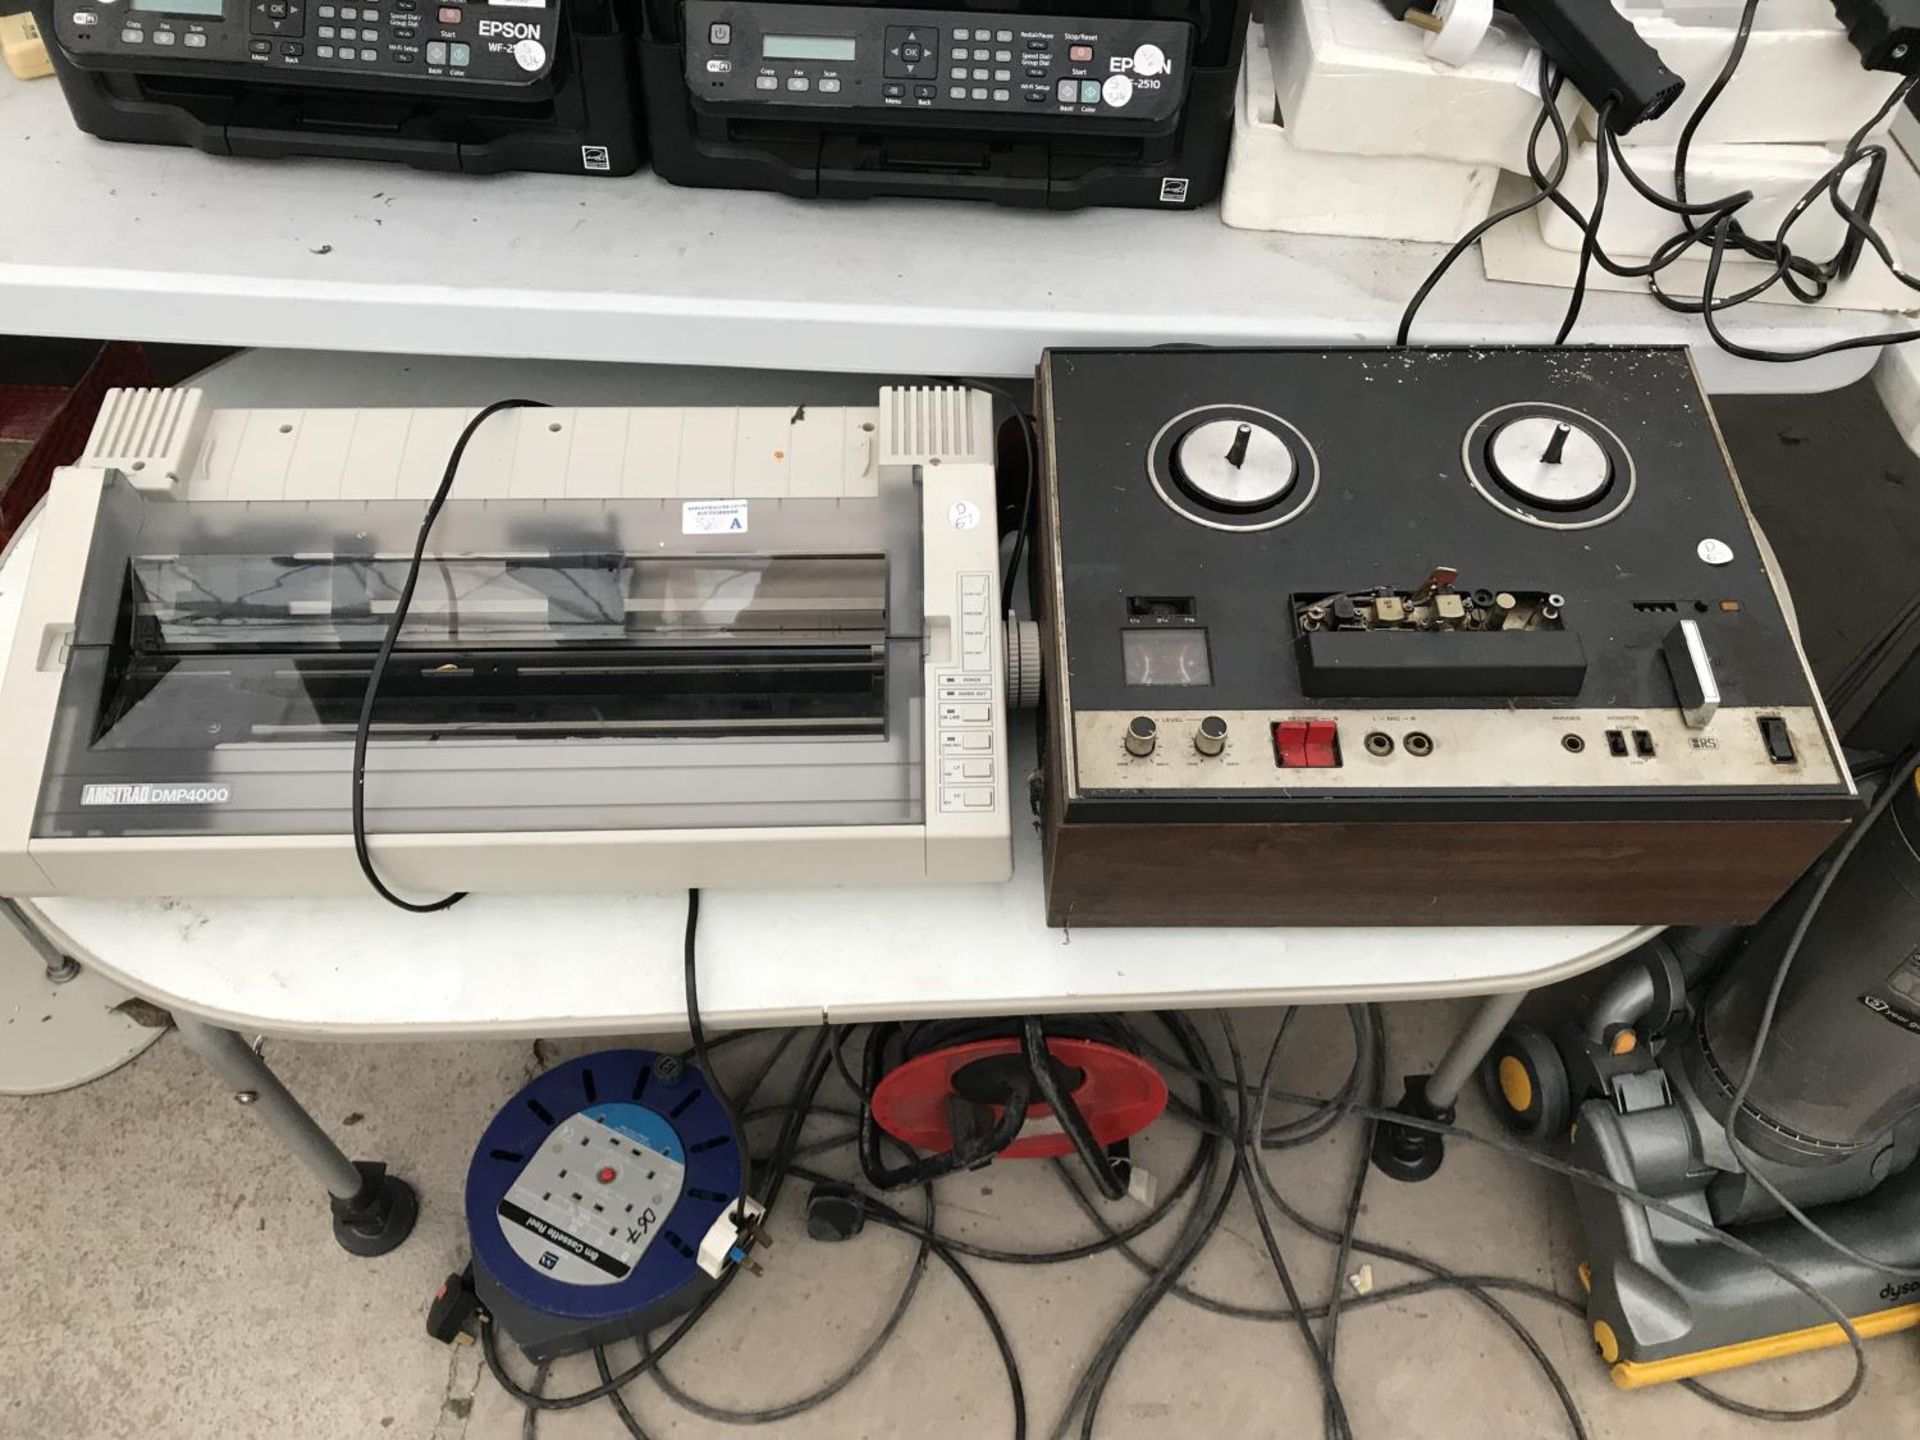 A VINTAGE REEL TO REEL RECORDING DECK AND AN AMSTRAD PRINTER